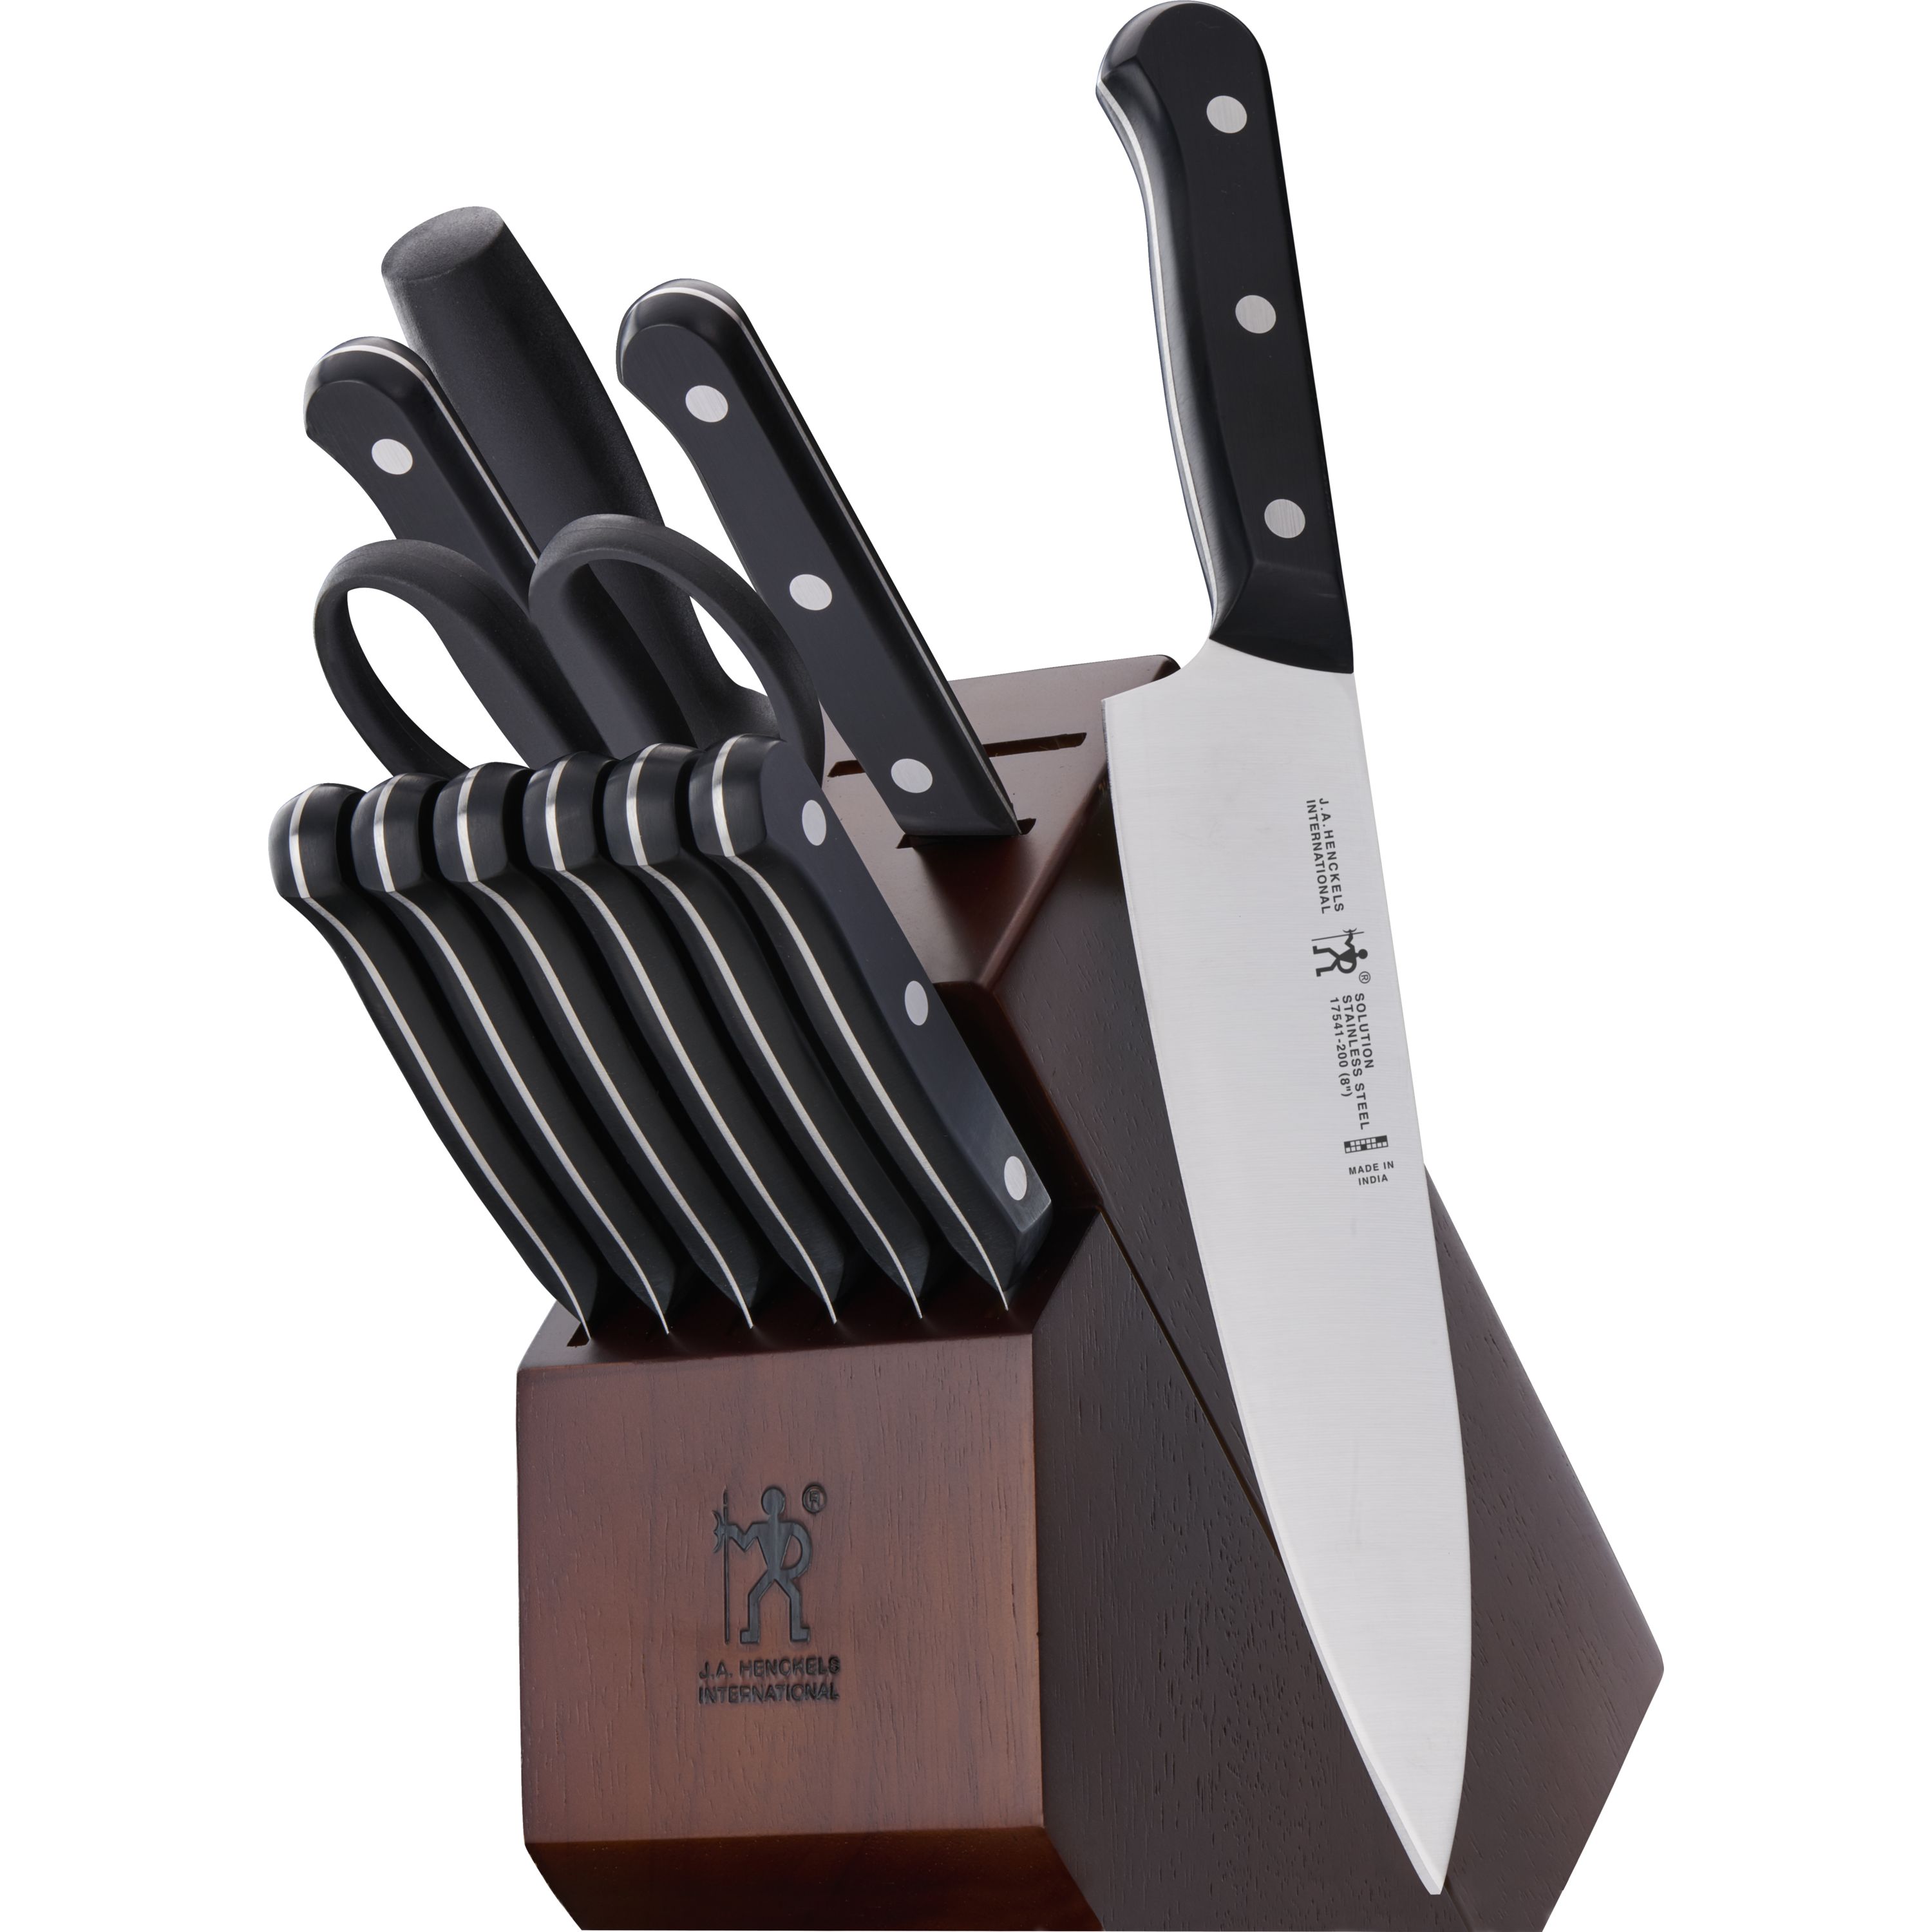 Zwilling Henckels International Solution 12-pc Knife Block Set - Stainless  Steel Blades, Plastic Handles, Dishwasher Safe - Includes Steak Knives &  Shears in the Cutlery department at